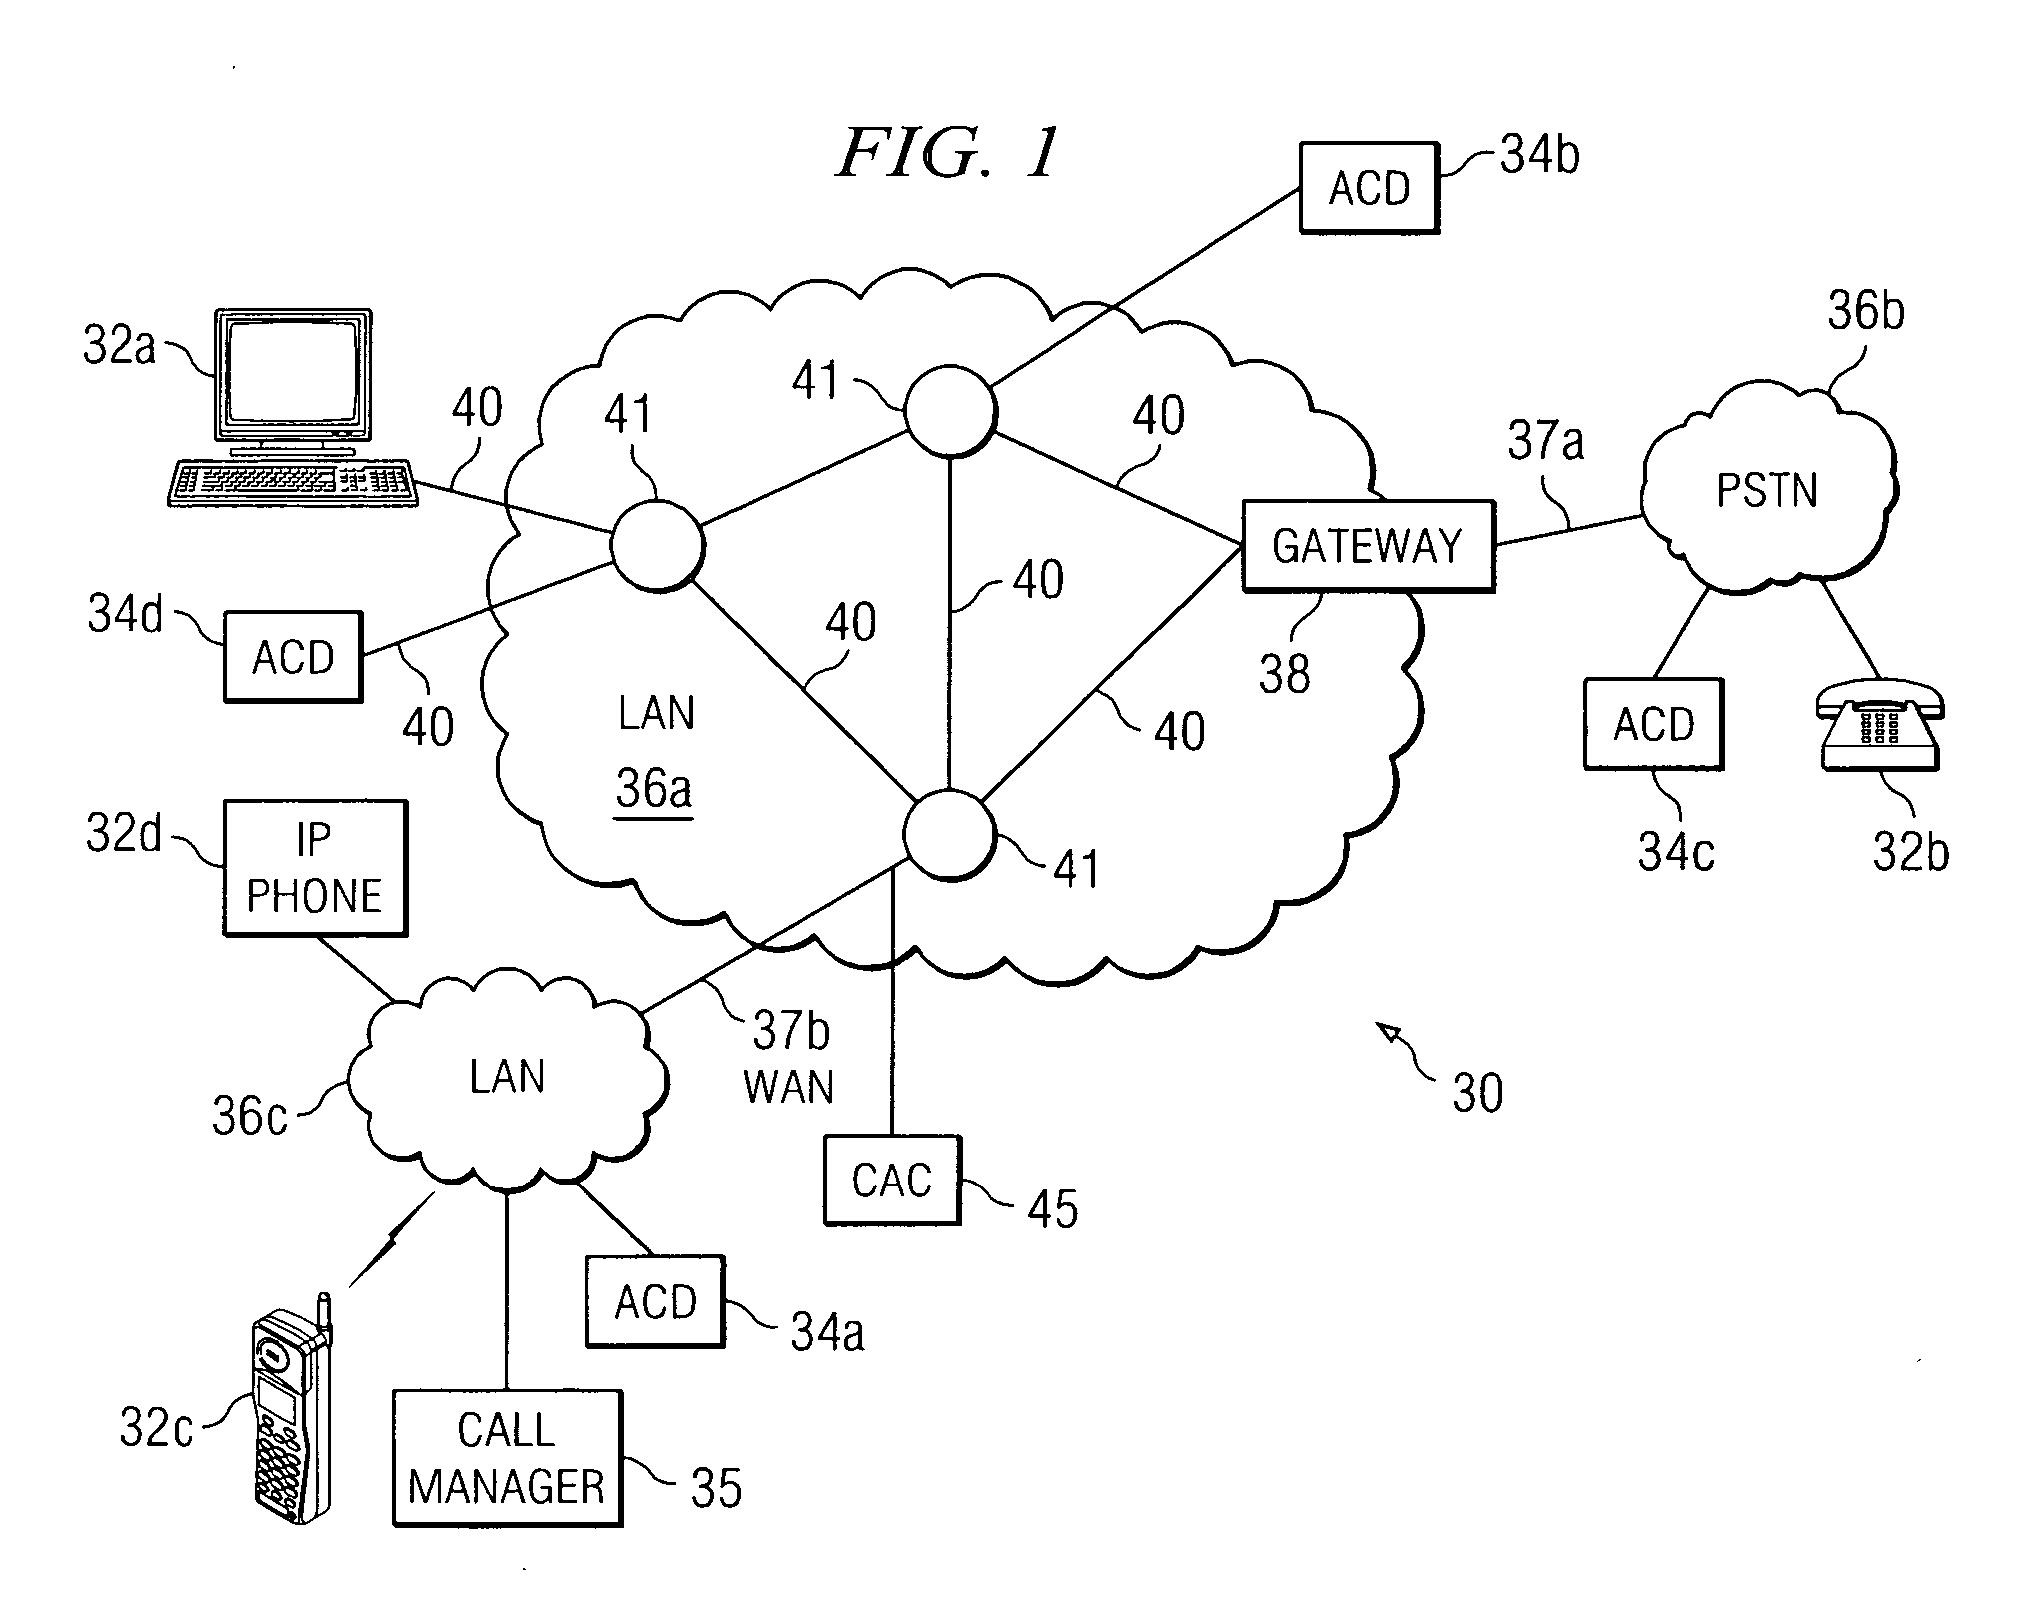 Method and system for handling calls at an automatic call distributor